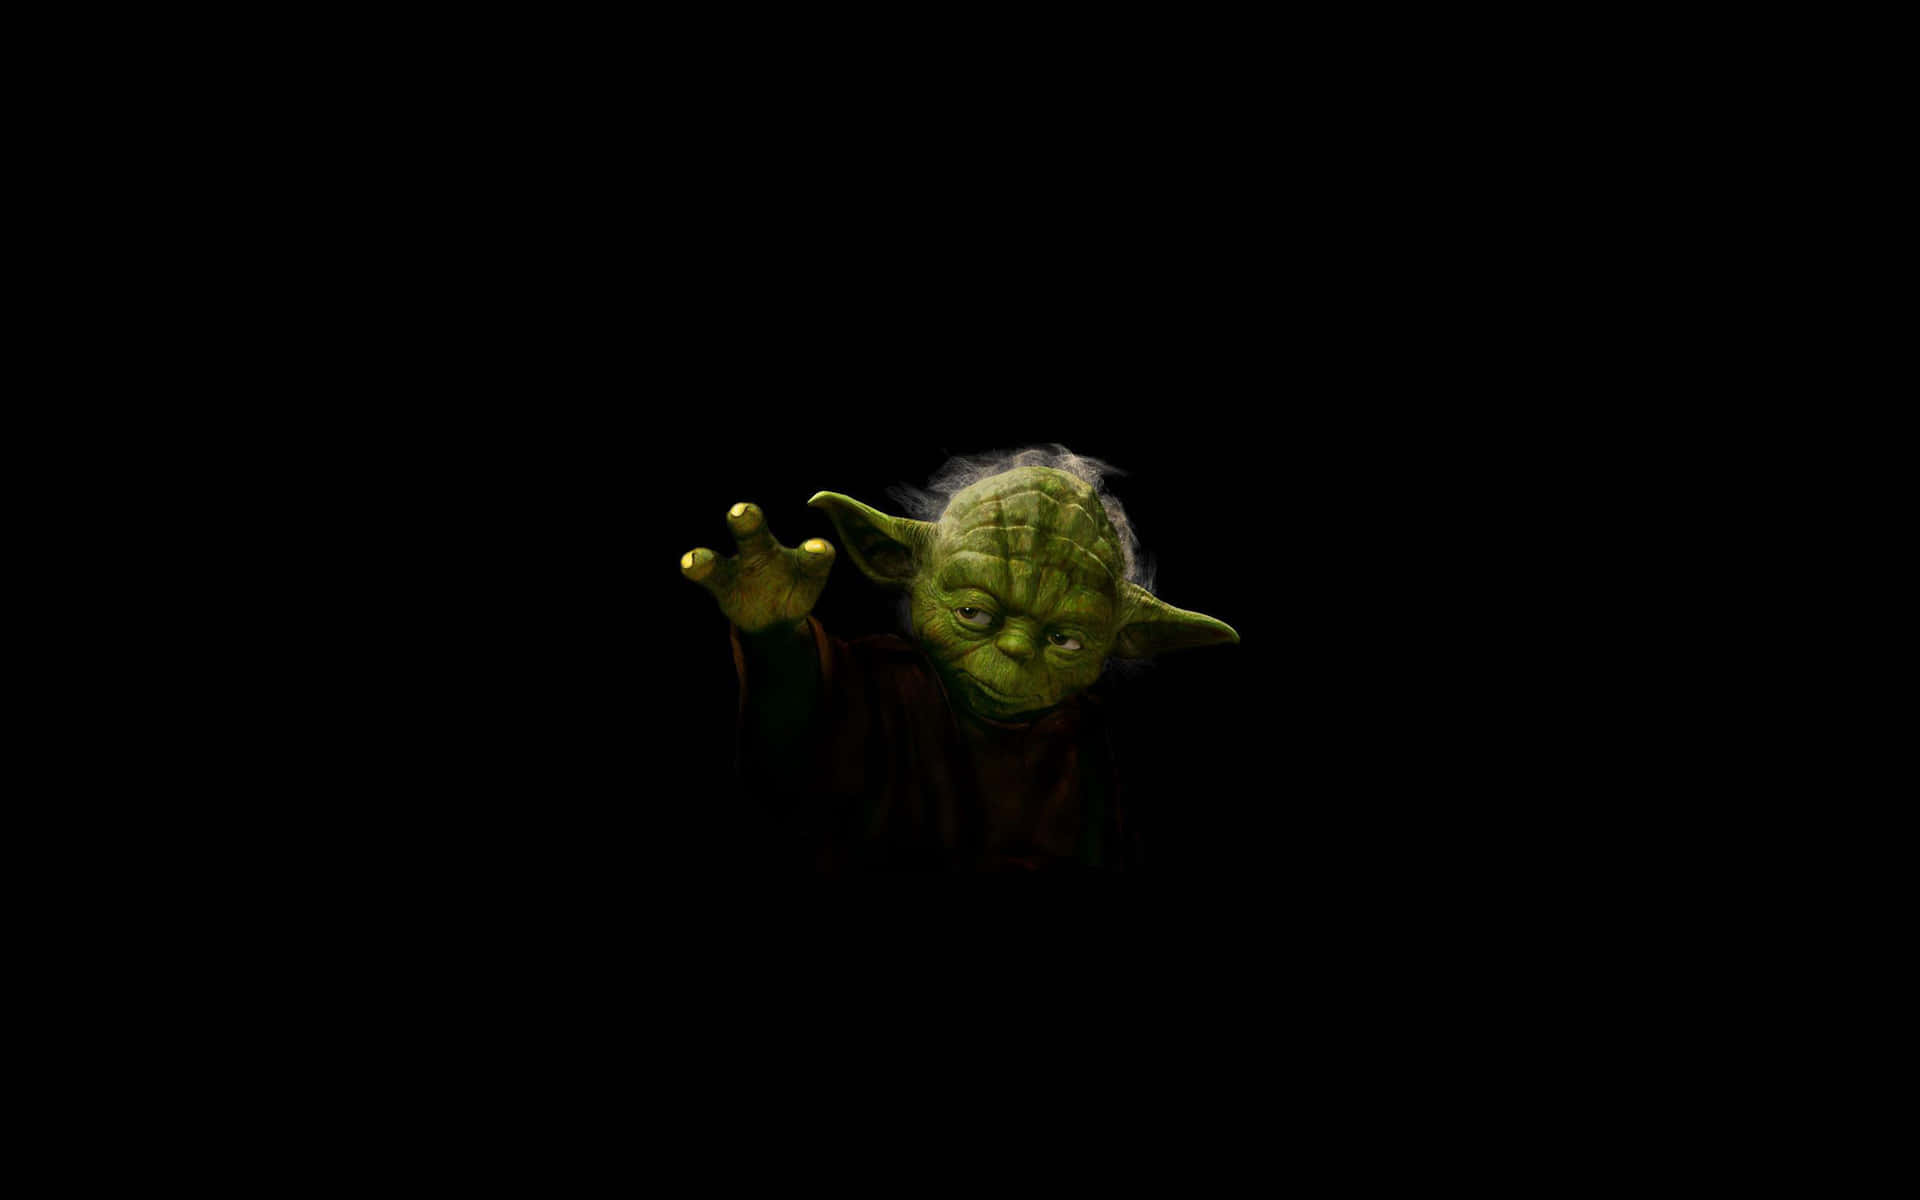 "A Jedi Knight Harnessing the Power of the Force" Wallpaper